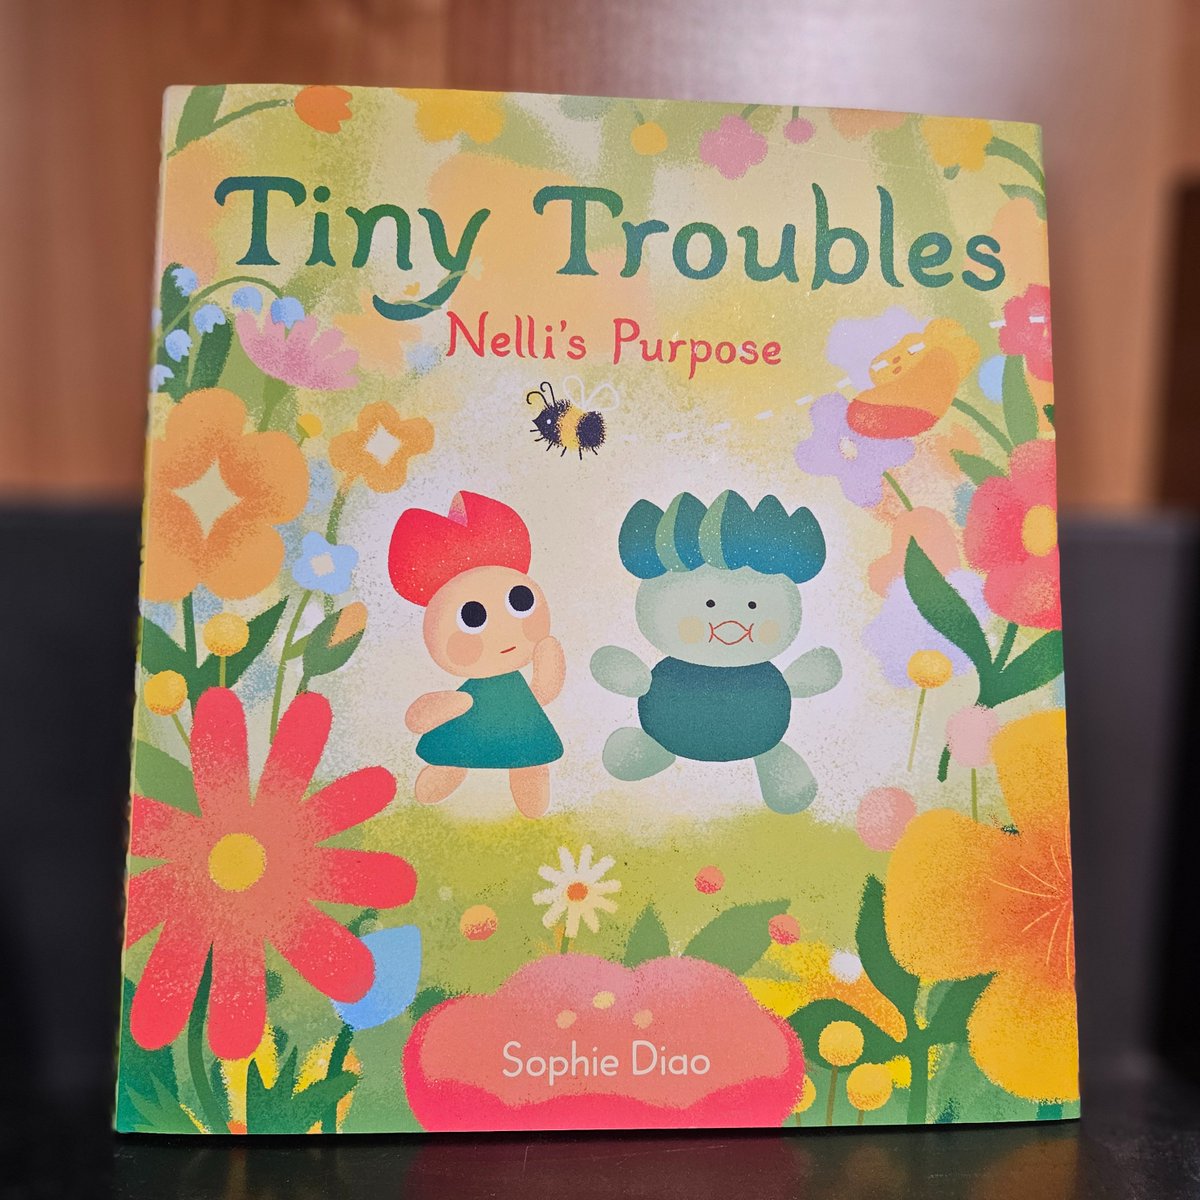 Looking for the perfect springtime #picturebook? Look no further than #TinyTroubles by #SophieDiao! Full of beautiful colors, irreverent humor, and two cute plants searching for their purpose. Meet the author this Saturday 2pm at @BooksIncStores Laurel Village! #NewBookTuesday